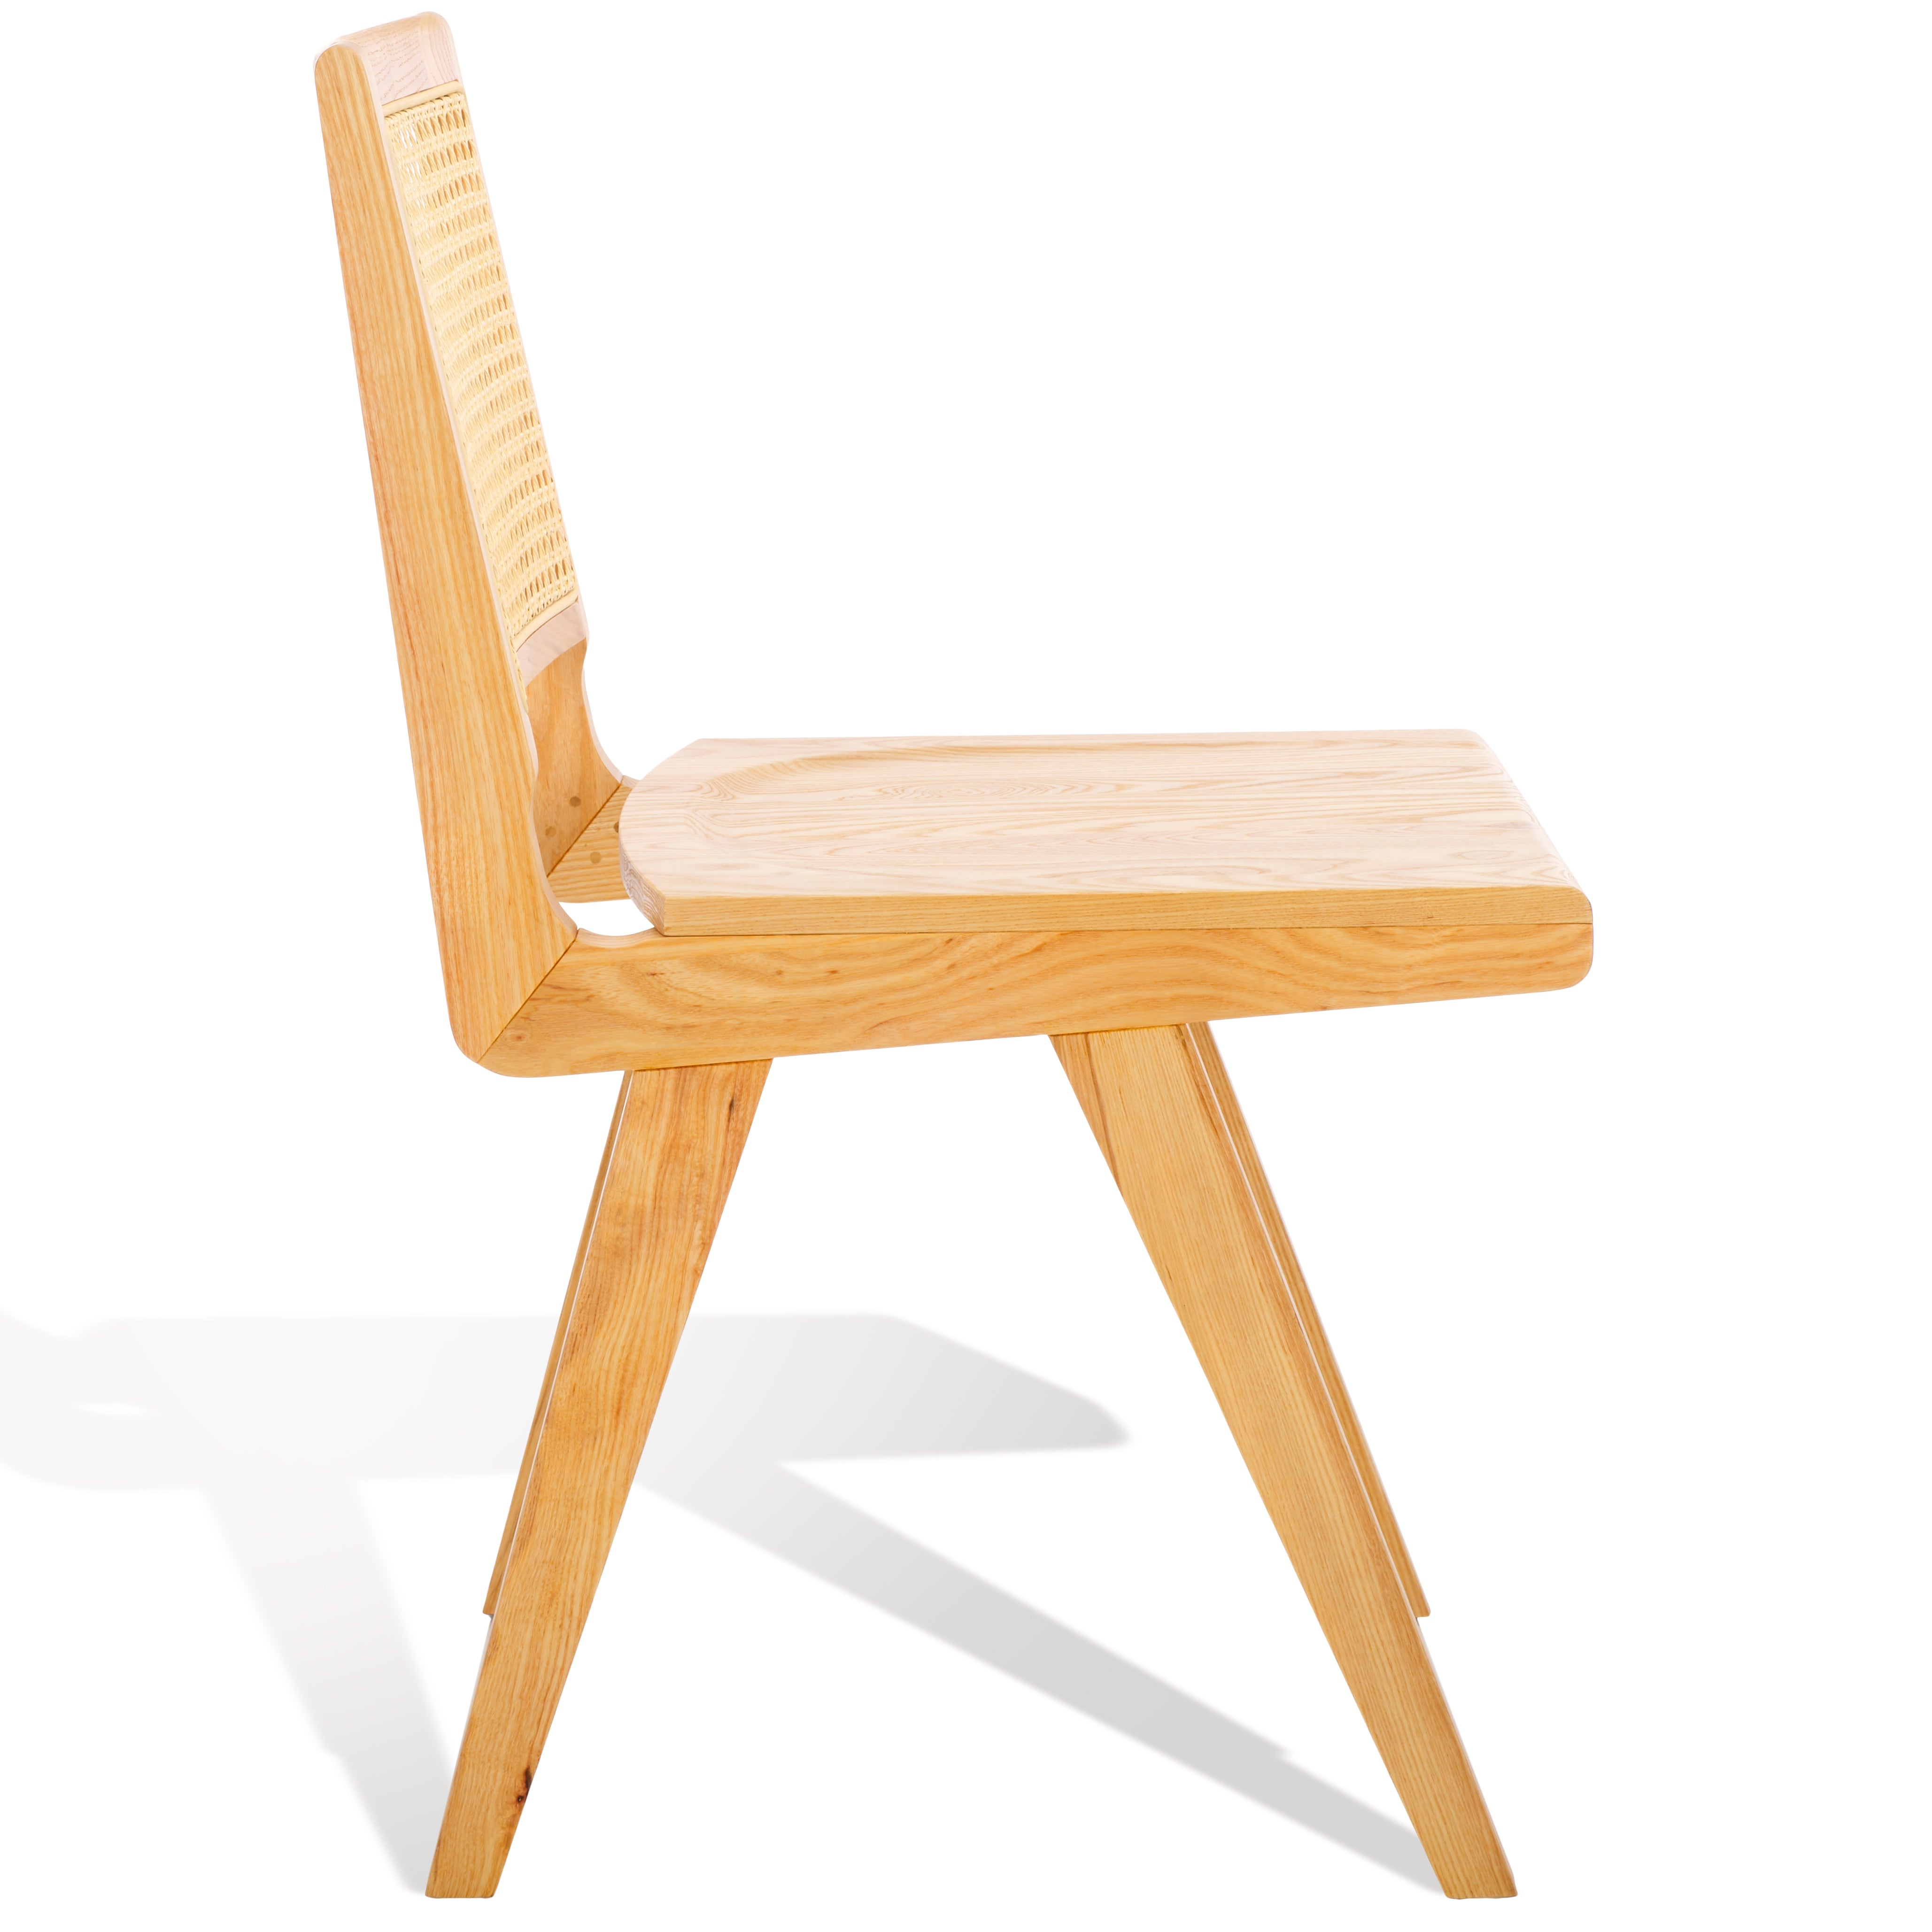 safavieh couture hattie french cane wood seat dining chair, sfv4153